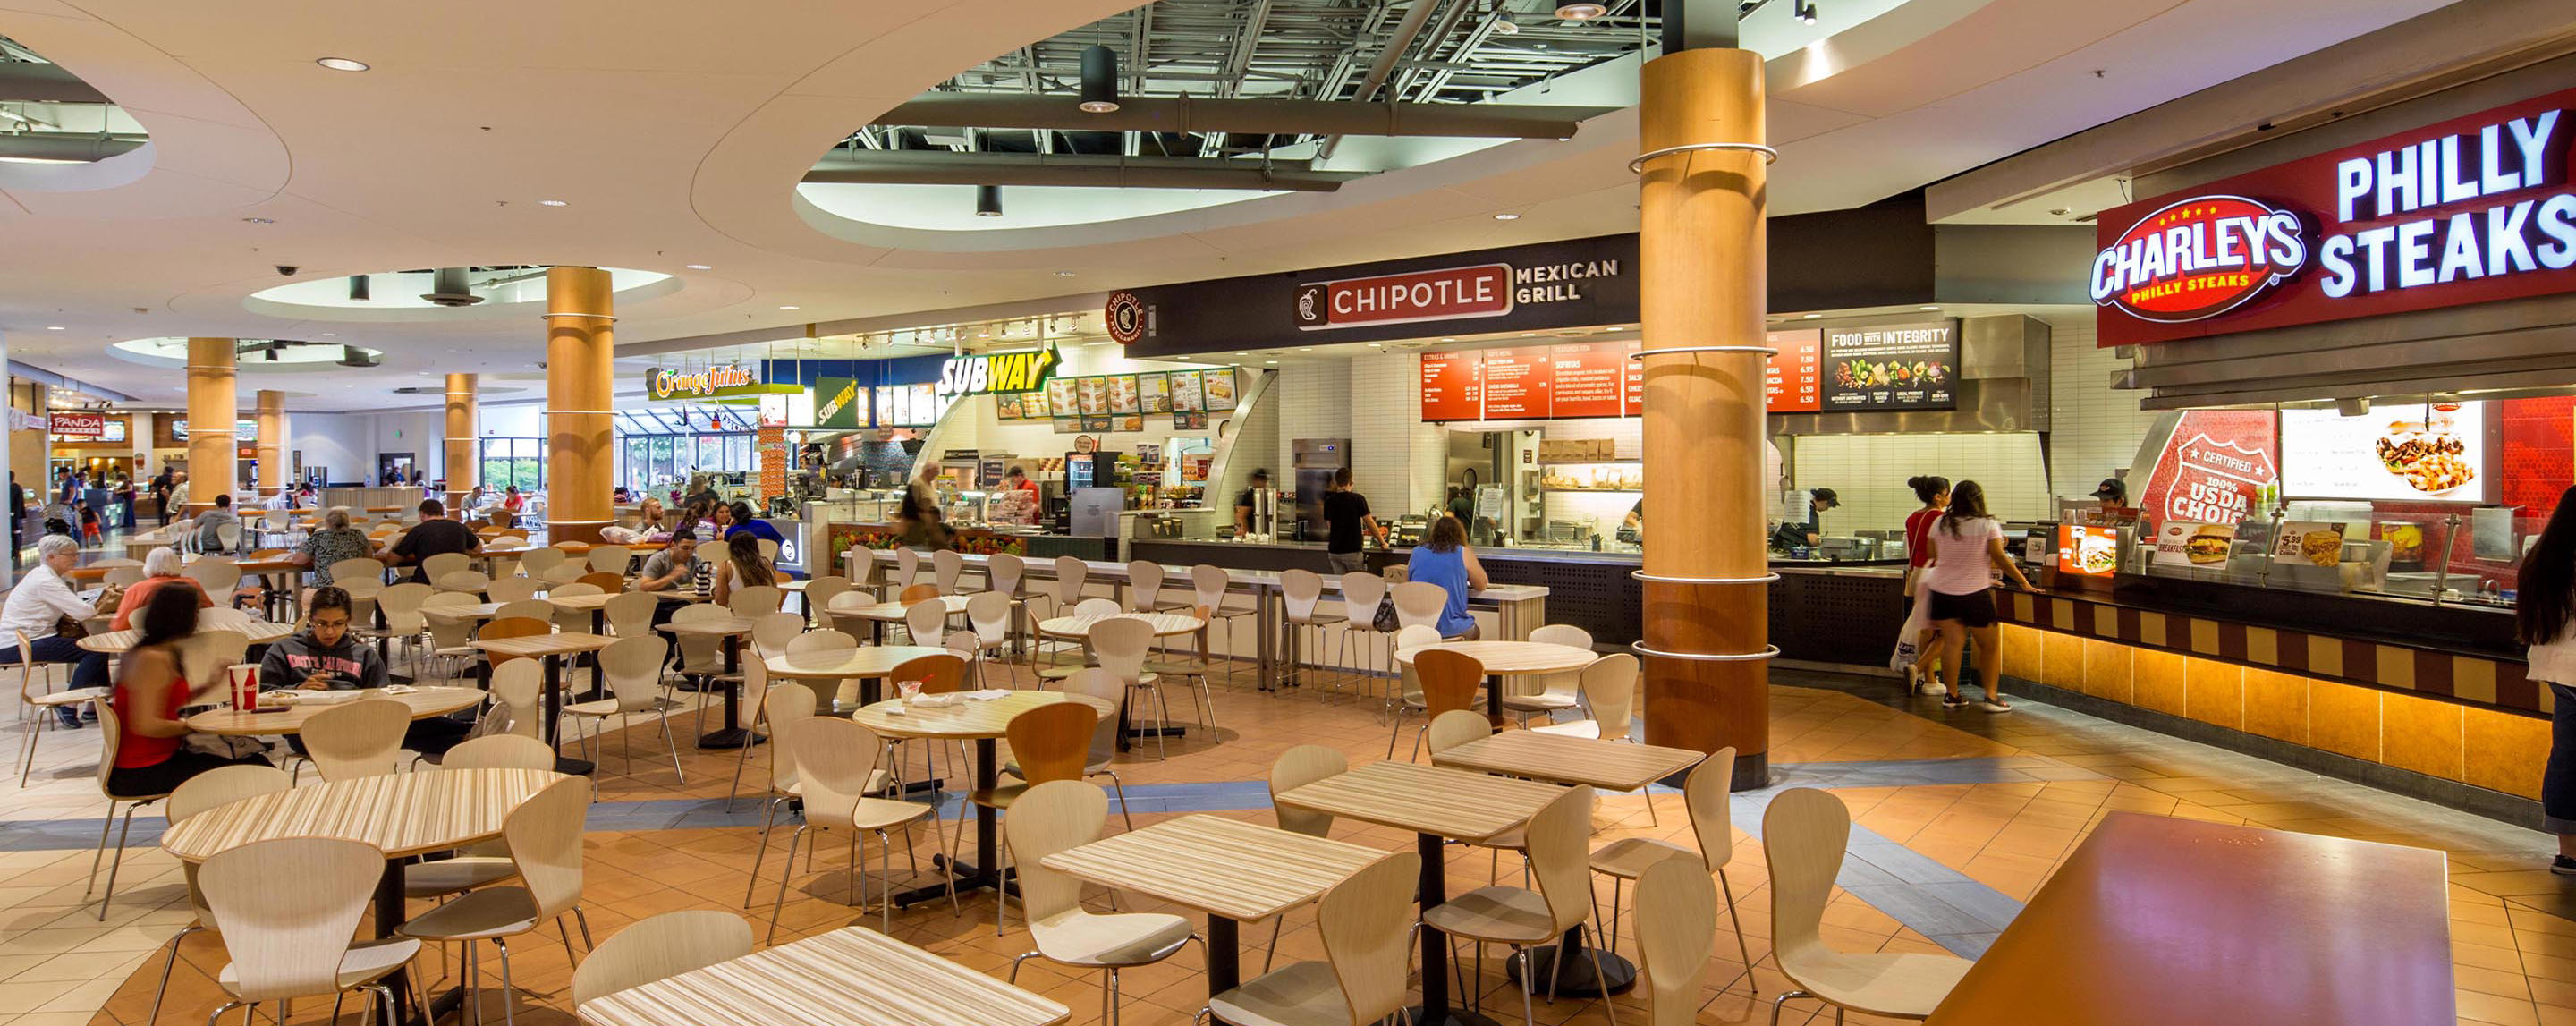 People sit at tables, walk around, and order food in a mall food court with establishments such as Subway and Chipotle.